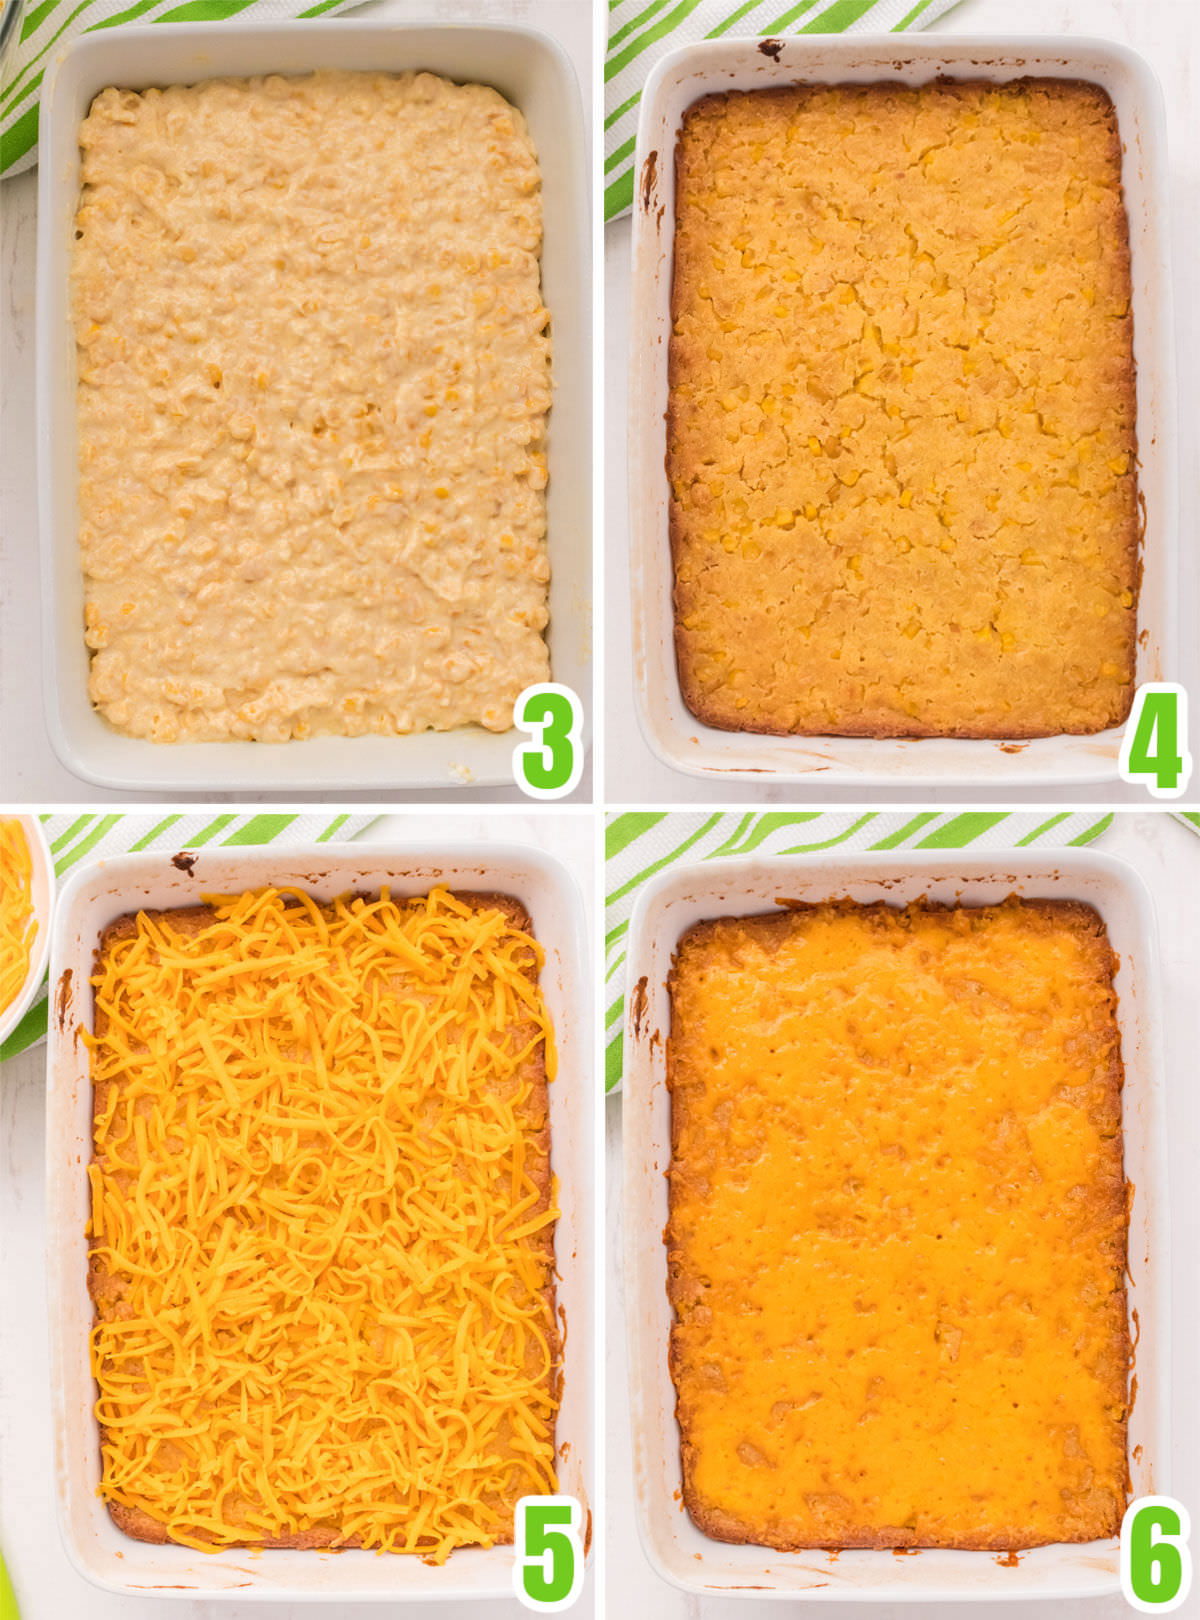 Collage image showing the steps for baking the Corn Pudding.